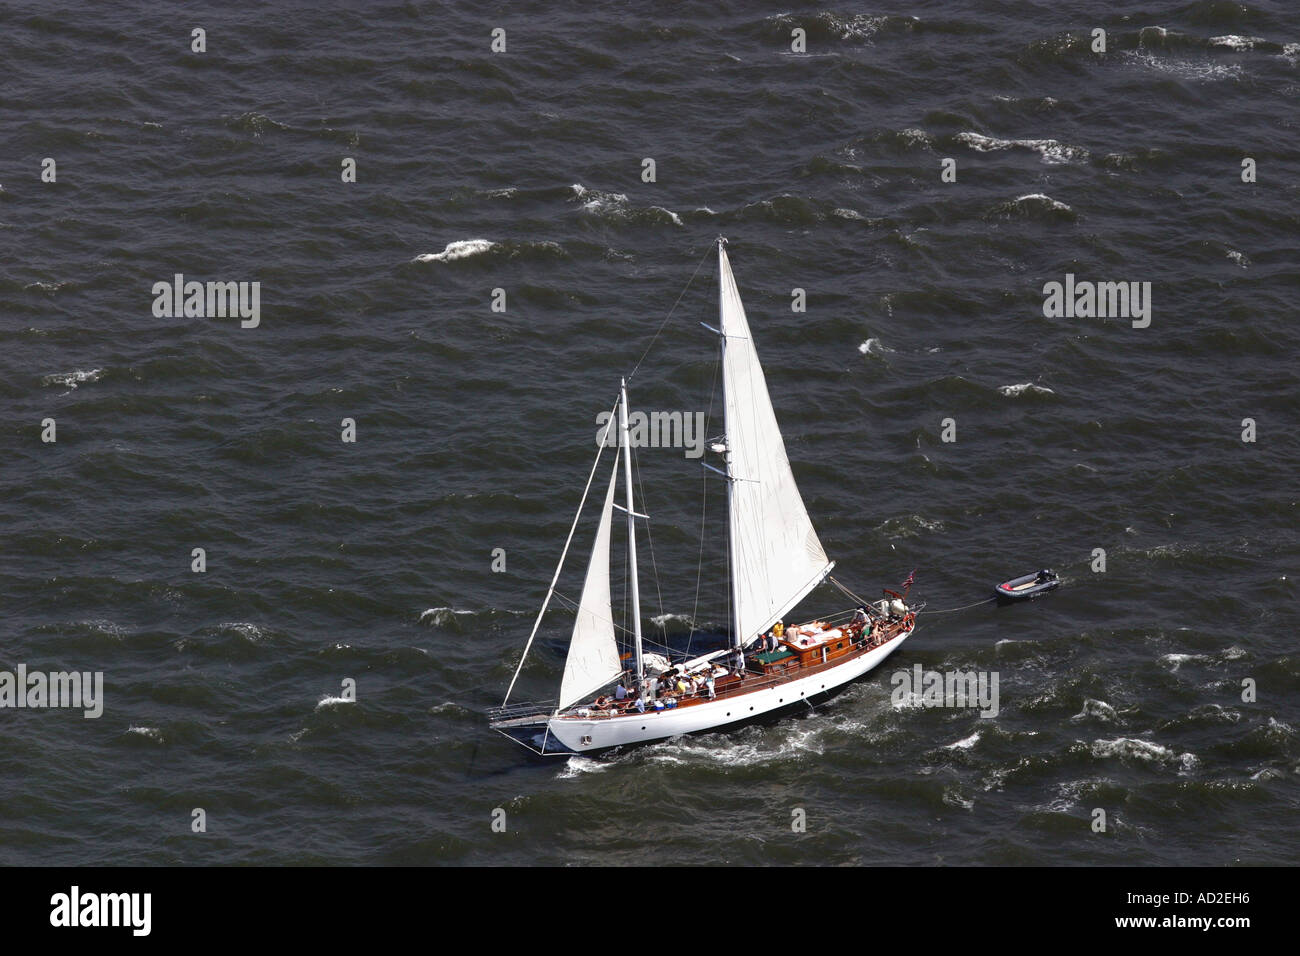 Aerial view of sailboat on New York Harbor Stock Photo